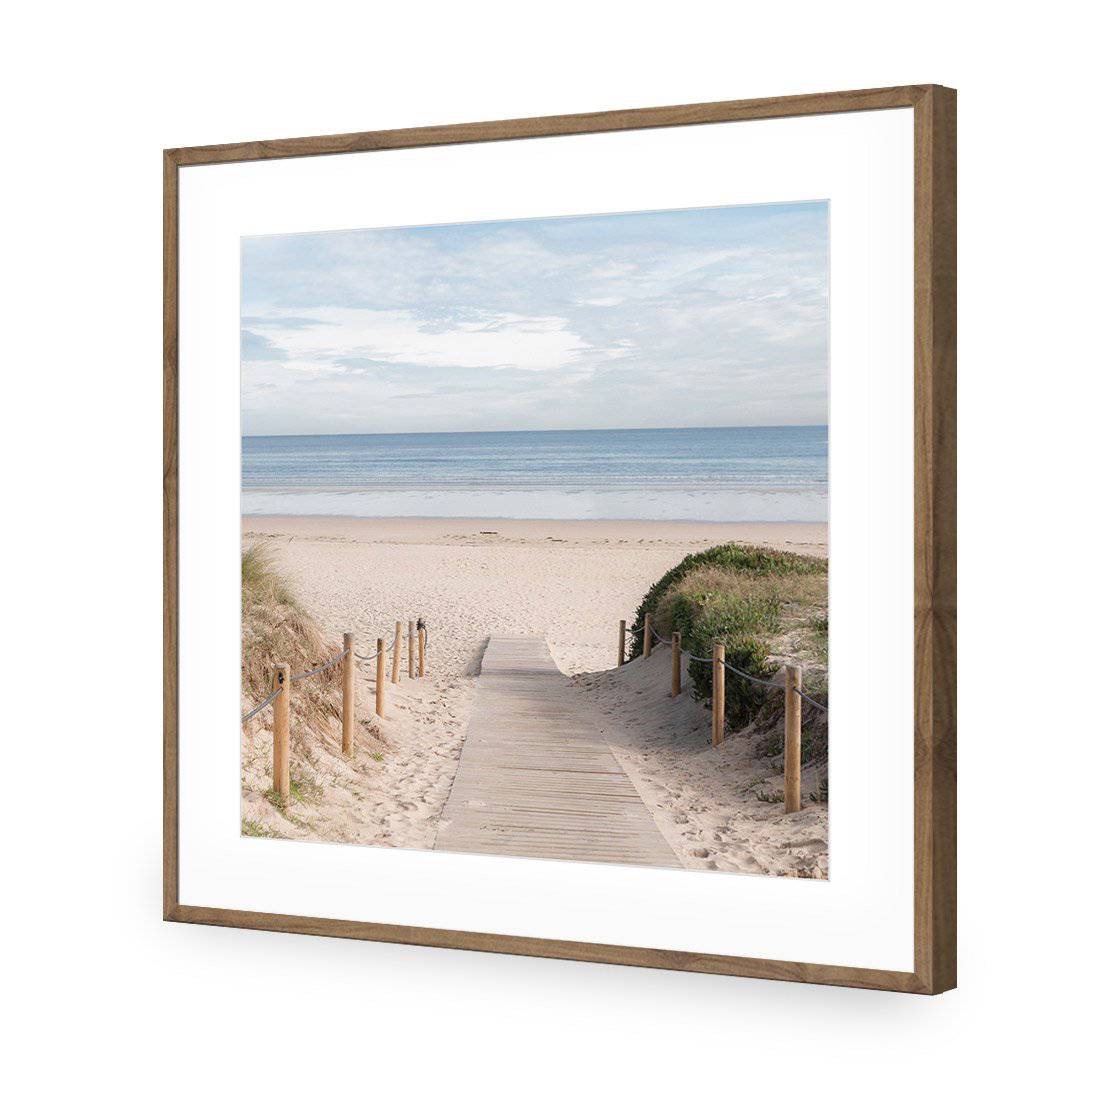 Pathway To The Sea, Square-Acrylic-Wall Art Design-With Border-Acrylic - Natural Frame-37x37cm-Wall Art Designs